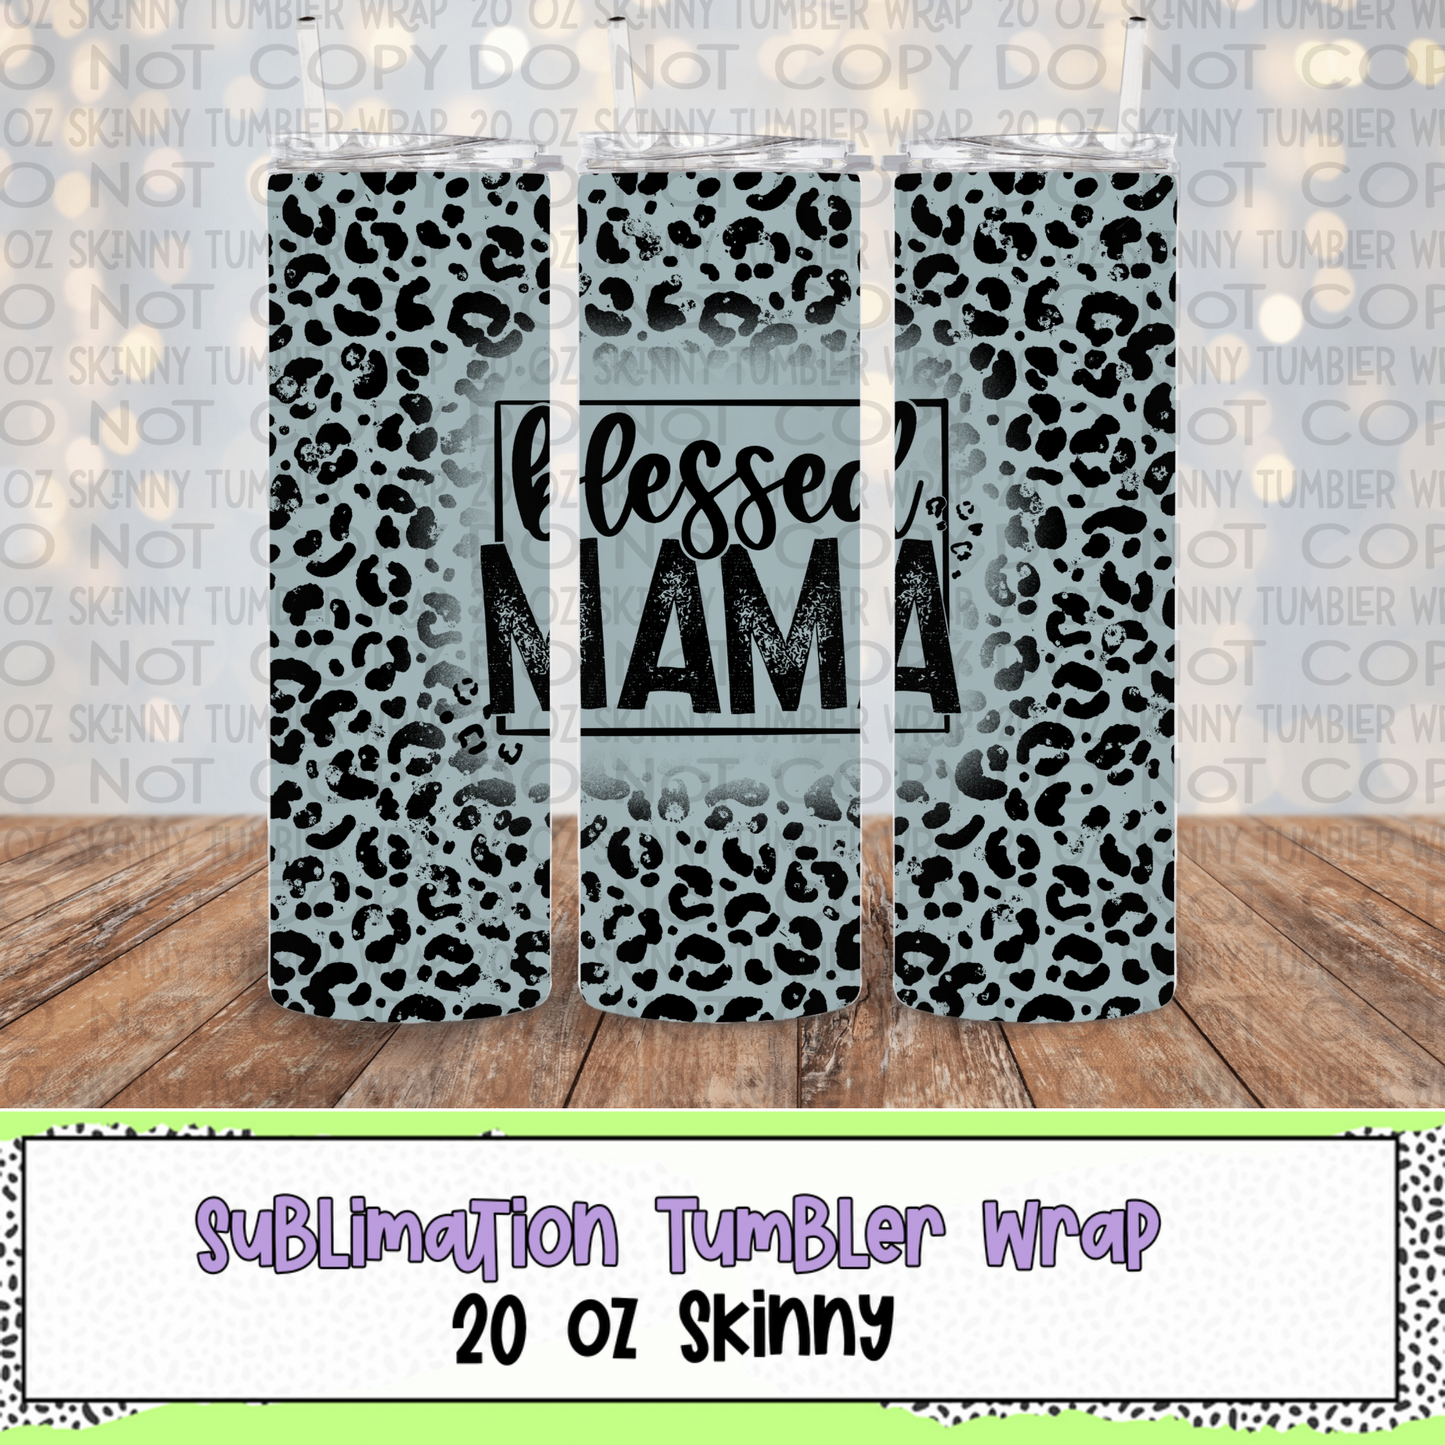 Blessed Mama Leopard Blue 20 Oz Skinny Tumbler Wrap - Sublimation Transfer - RTS